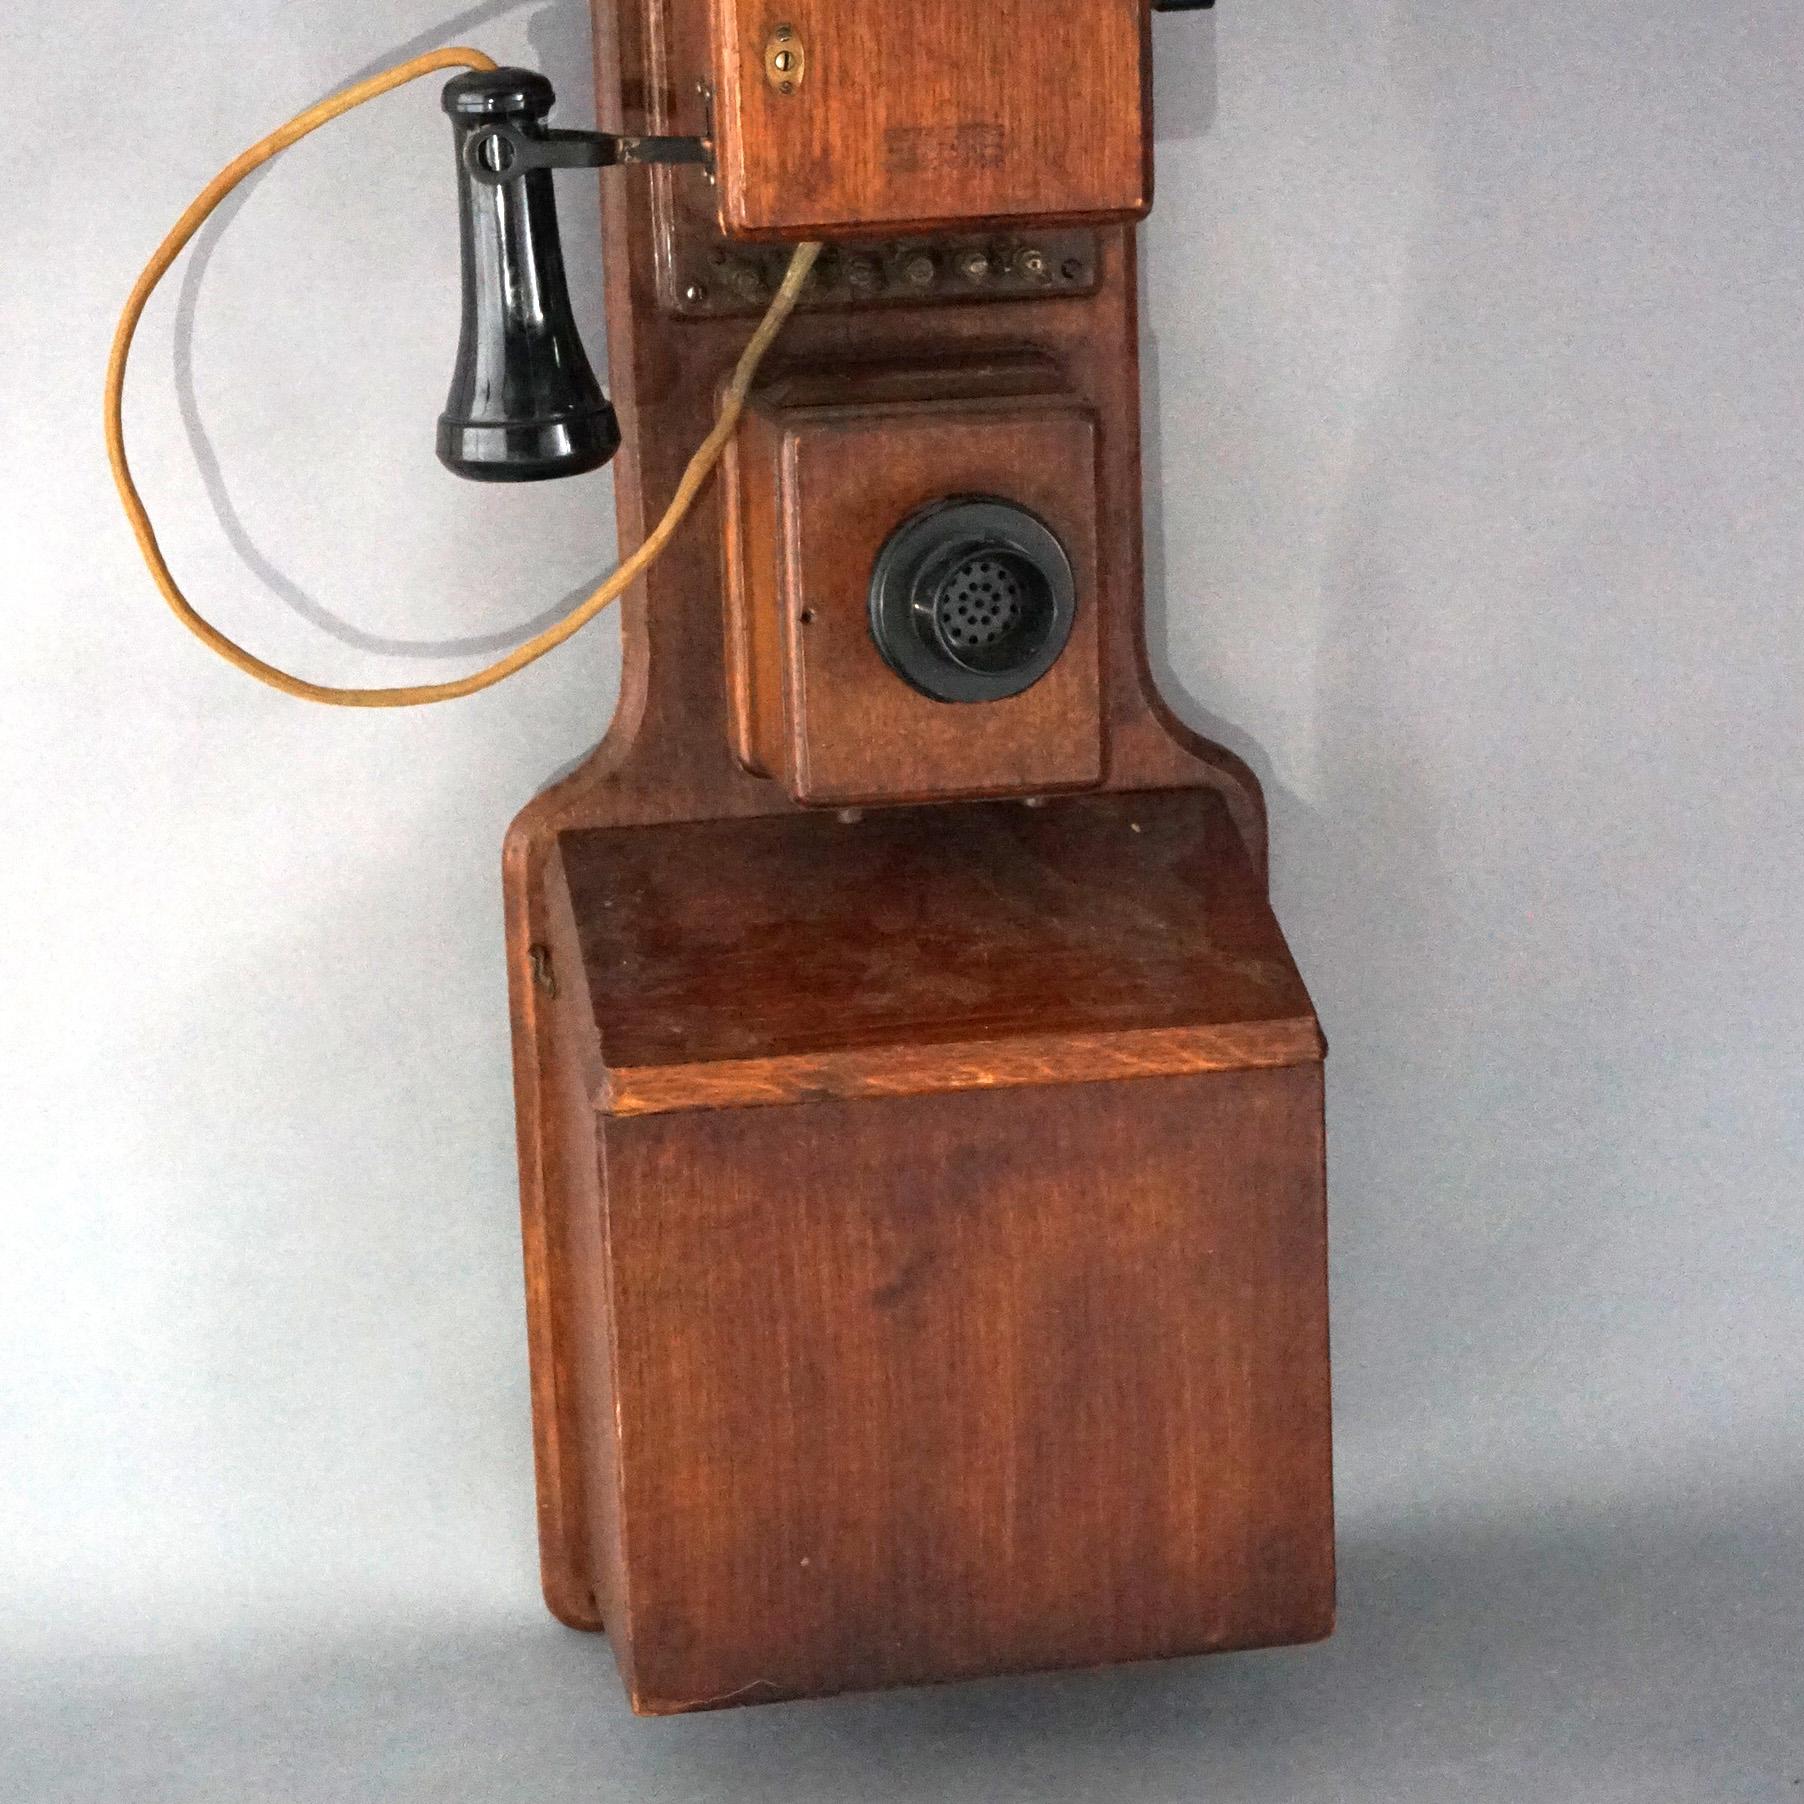 American Antique Western Electric Oak Hand-Crank Wall Telephone with Modern Rewire, C1900